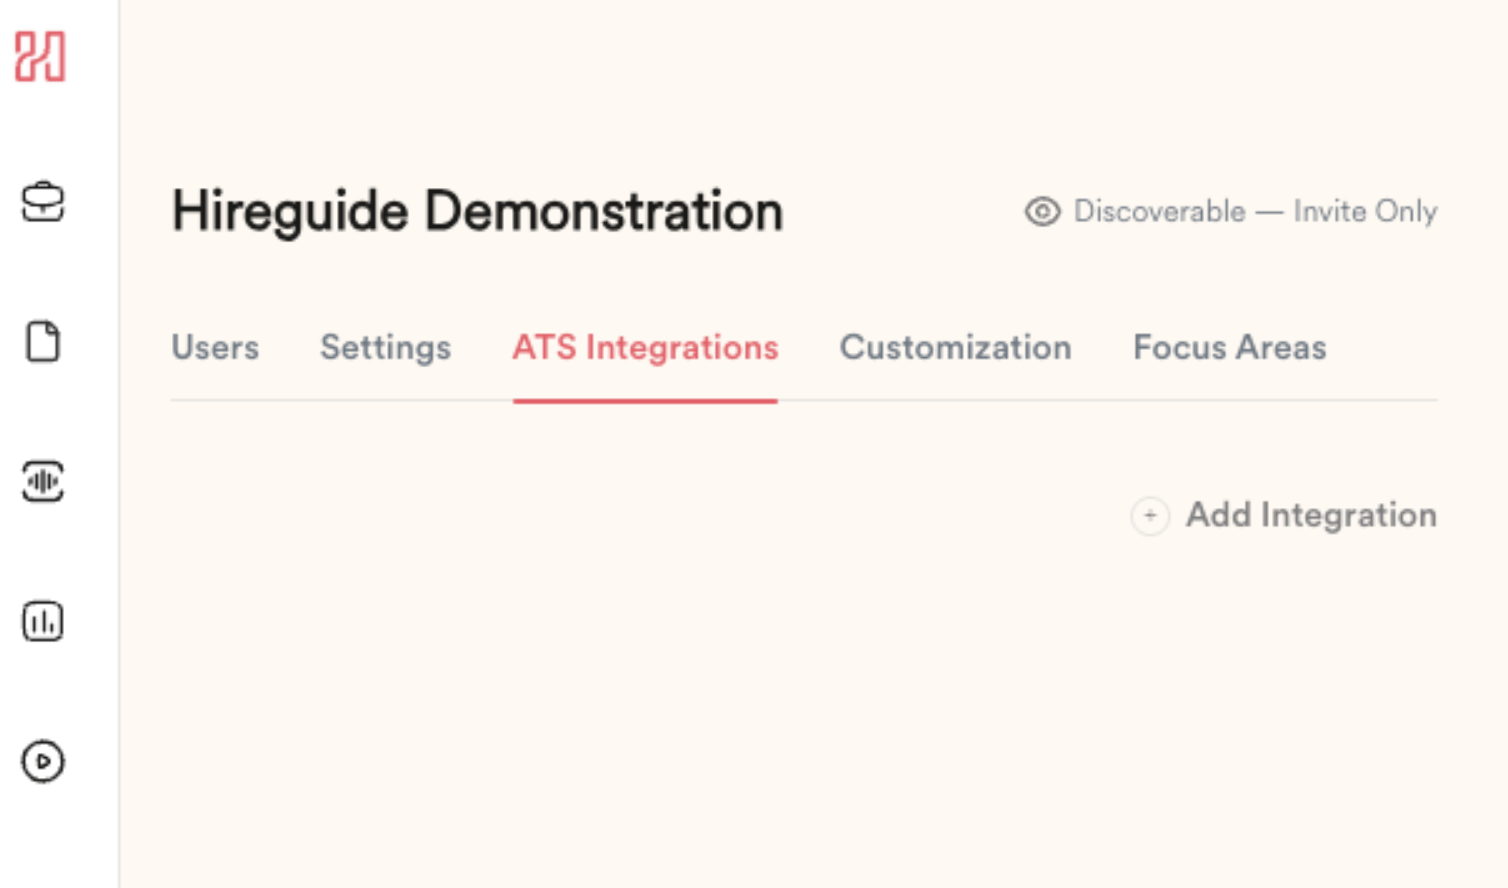 ATS integrations page in Hireguide